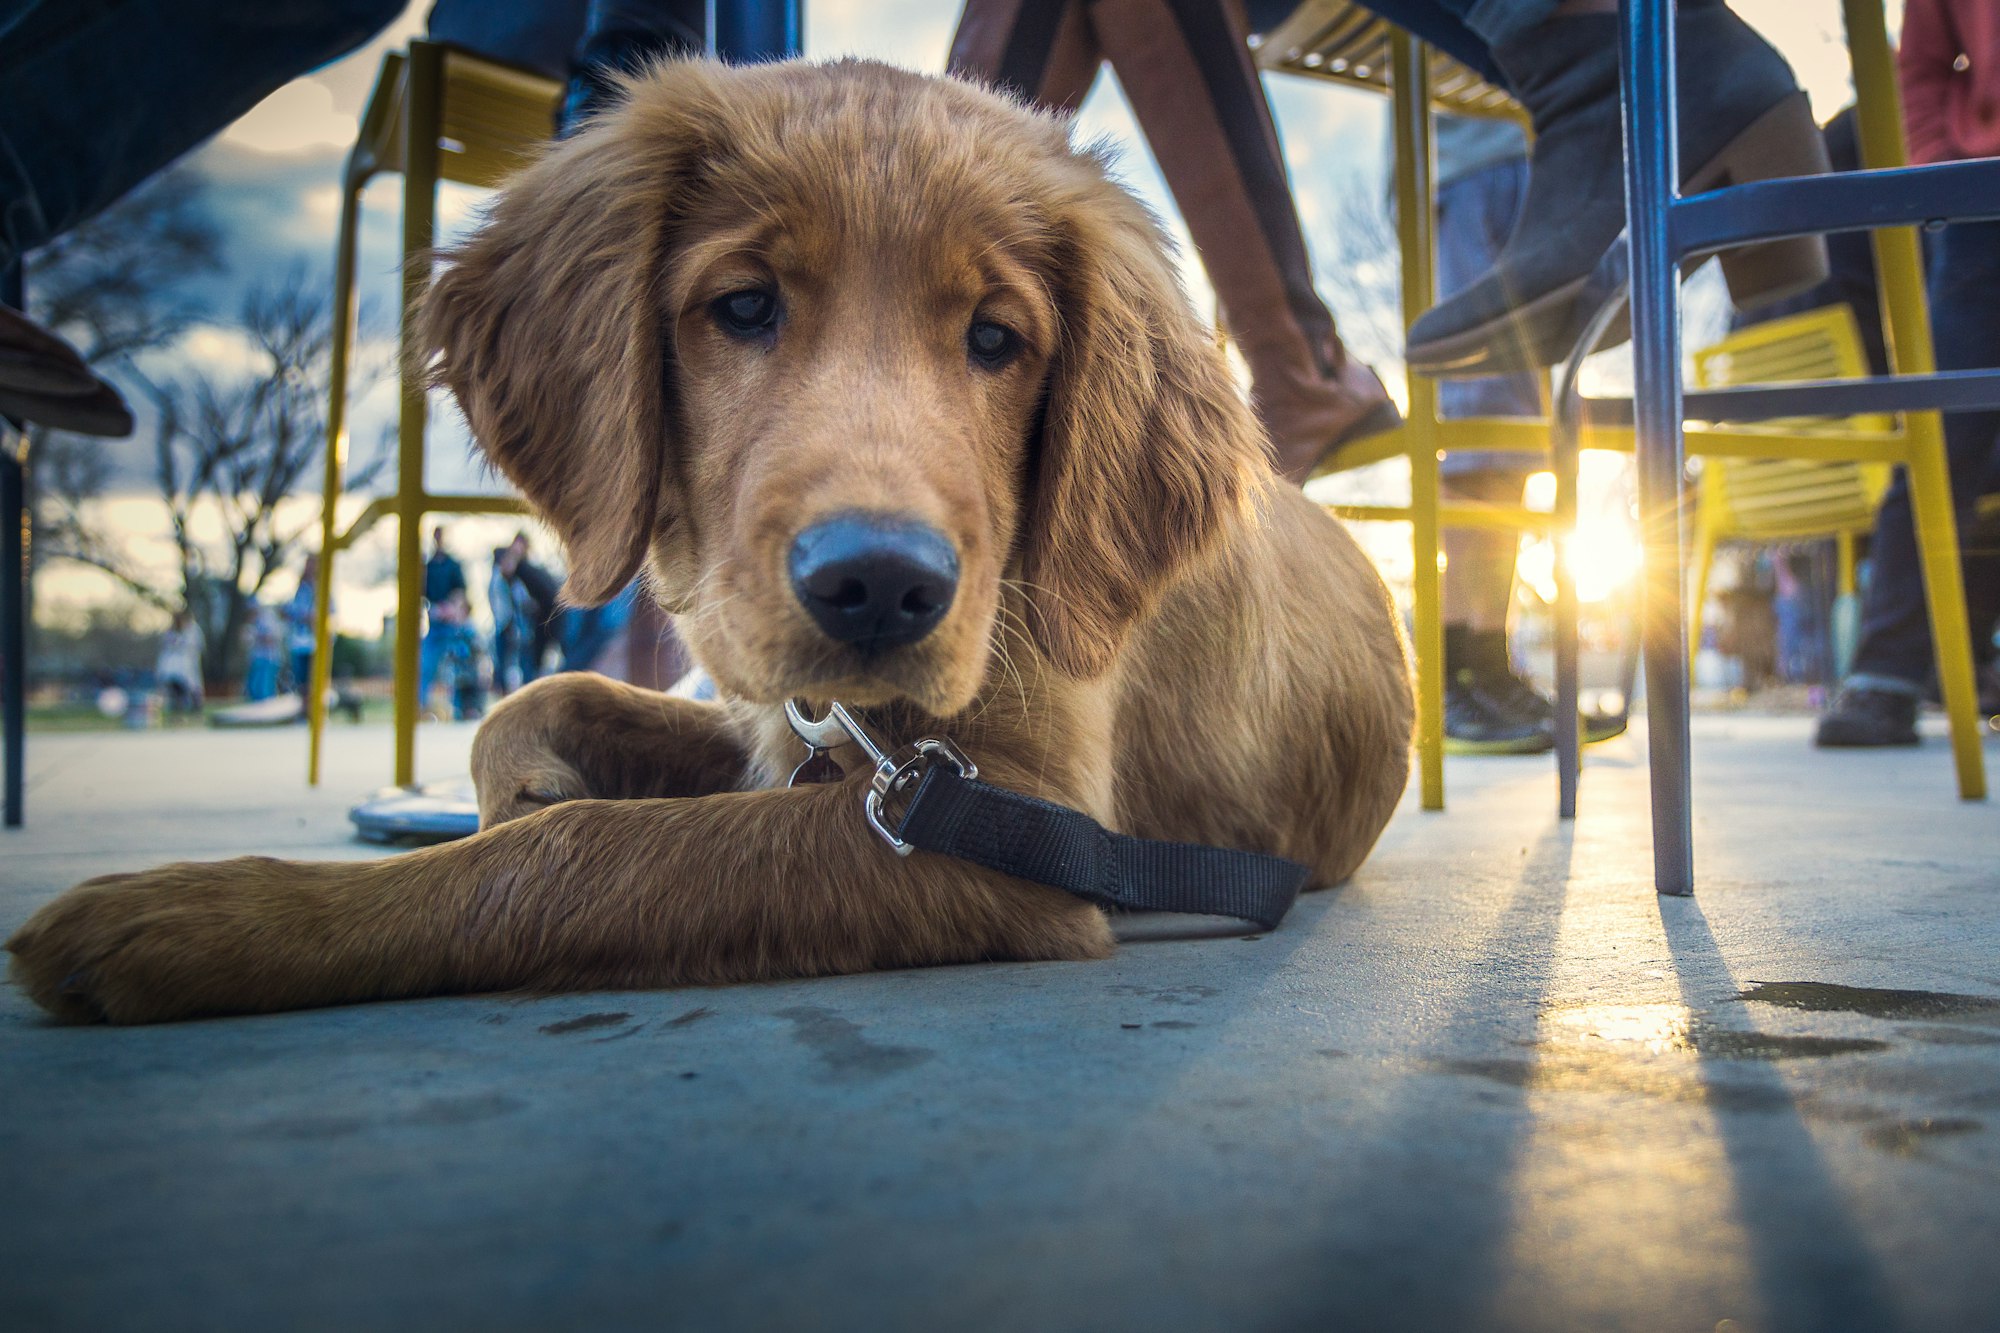 8 Quick Tips for Restaurant Dining With Your Dog